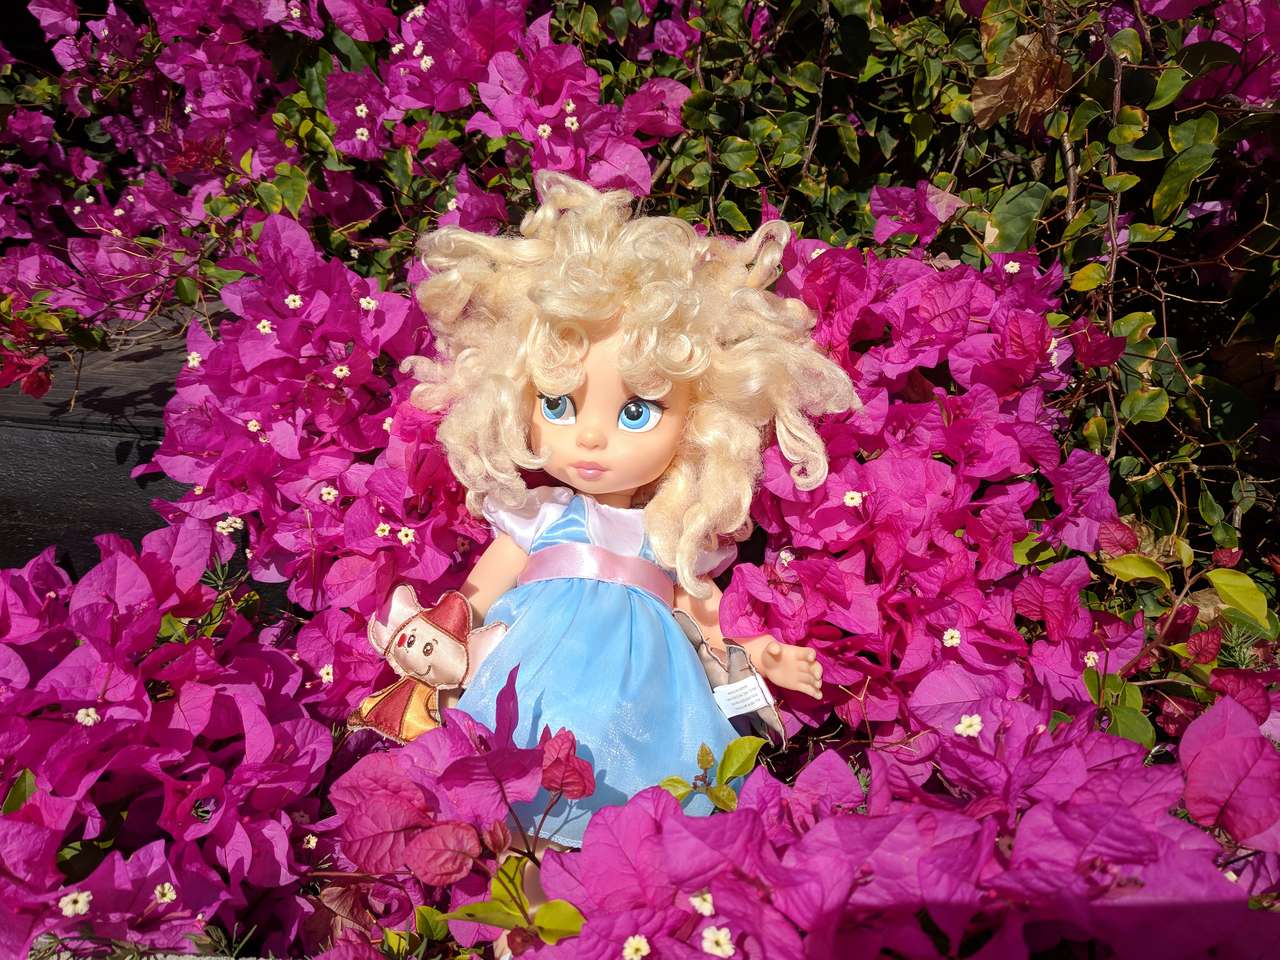 Dolly & Flowers puzzle online from photo